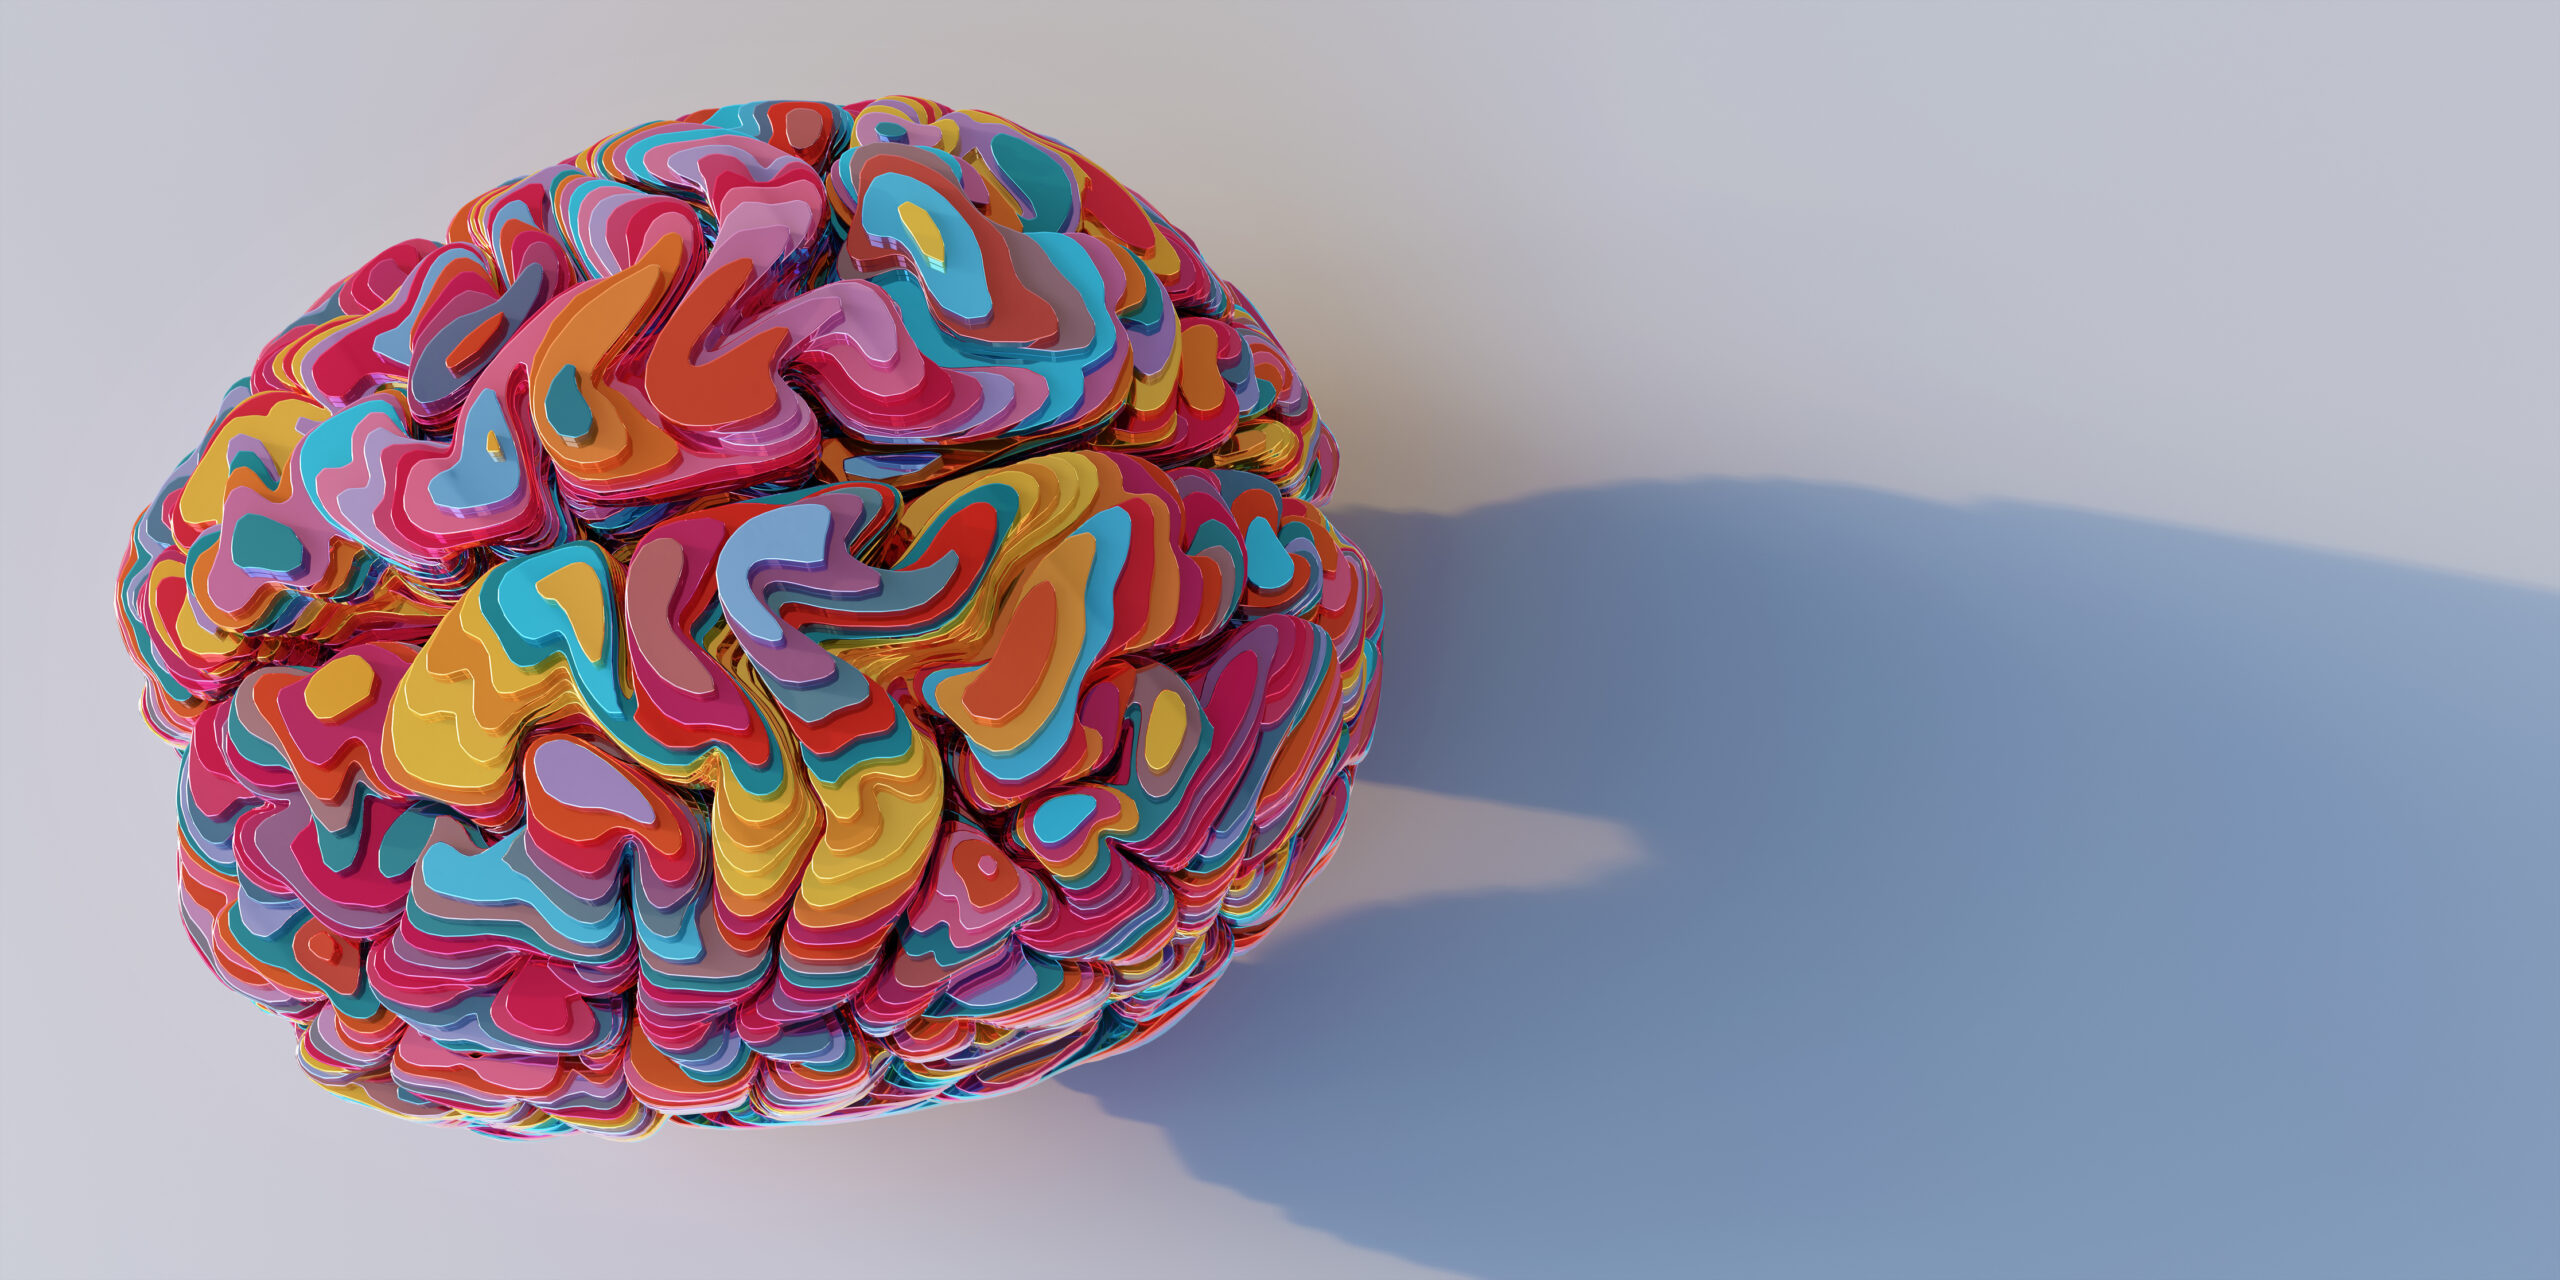 A model of a human brain viewed from above, sliced into many horizontal multi-coloured layers of shiny metallic material, stacked up to form brain model. The model sits on a plain white surface with shadow.